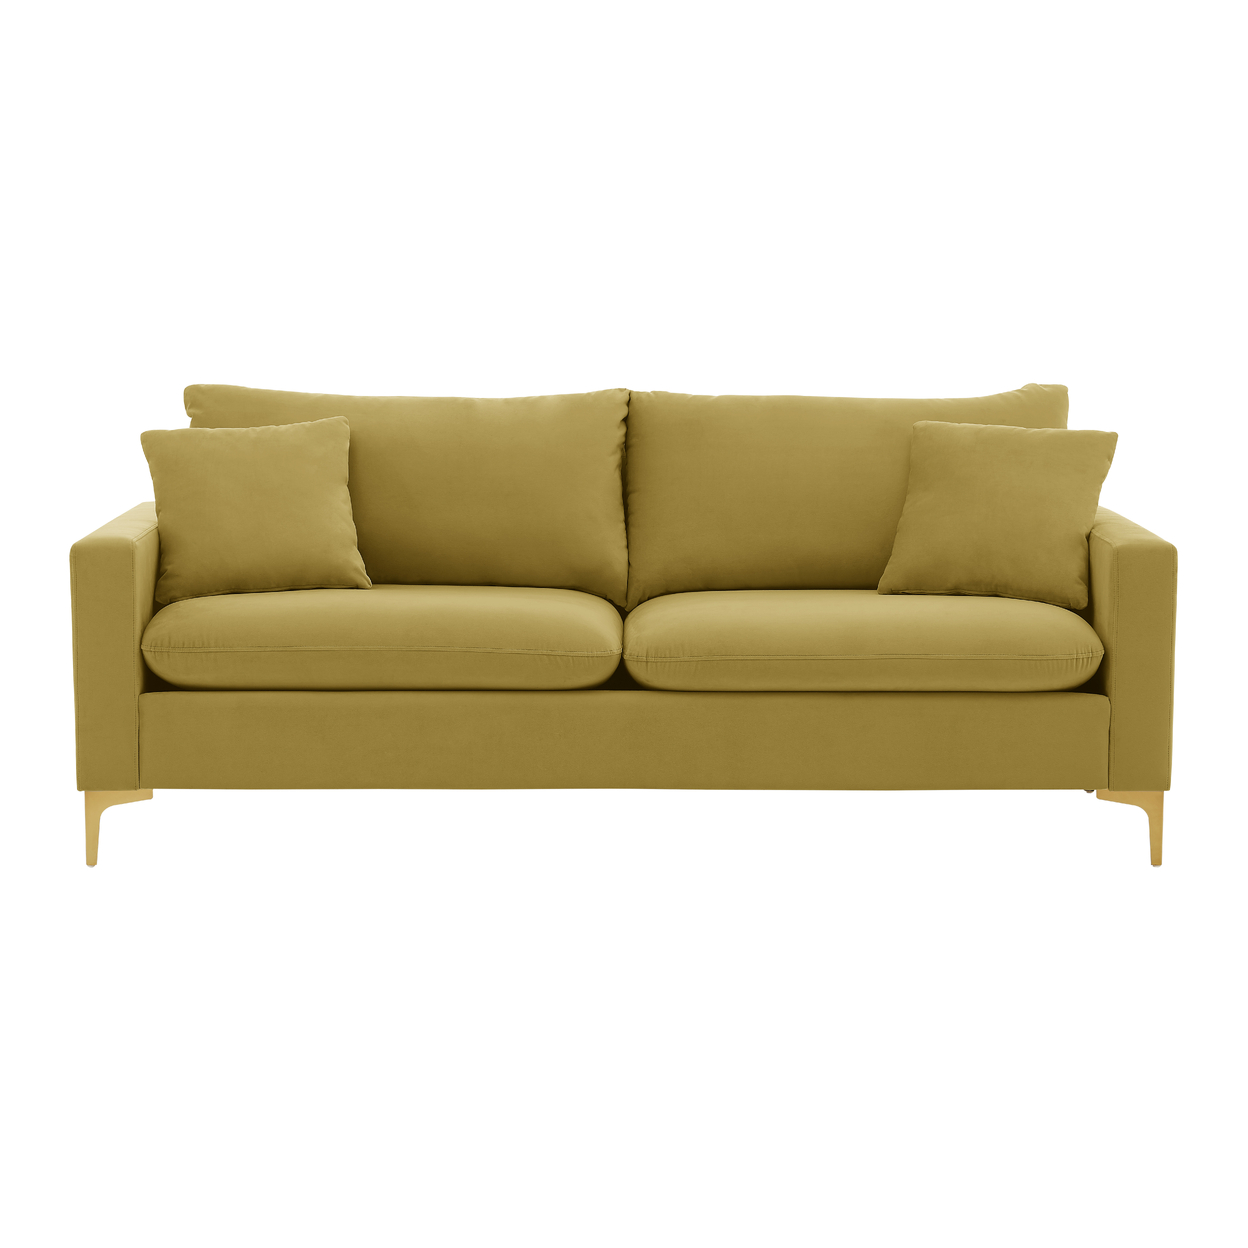 Iconic Home Roxi Sofa Velvet Upholstered Multi-Cushion Seat Gold Tone Metal Y-Legs With 2 Decorative Pillows - Gold